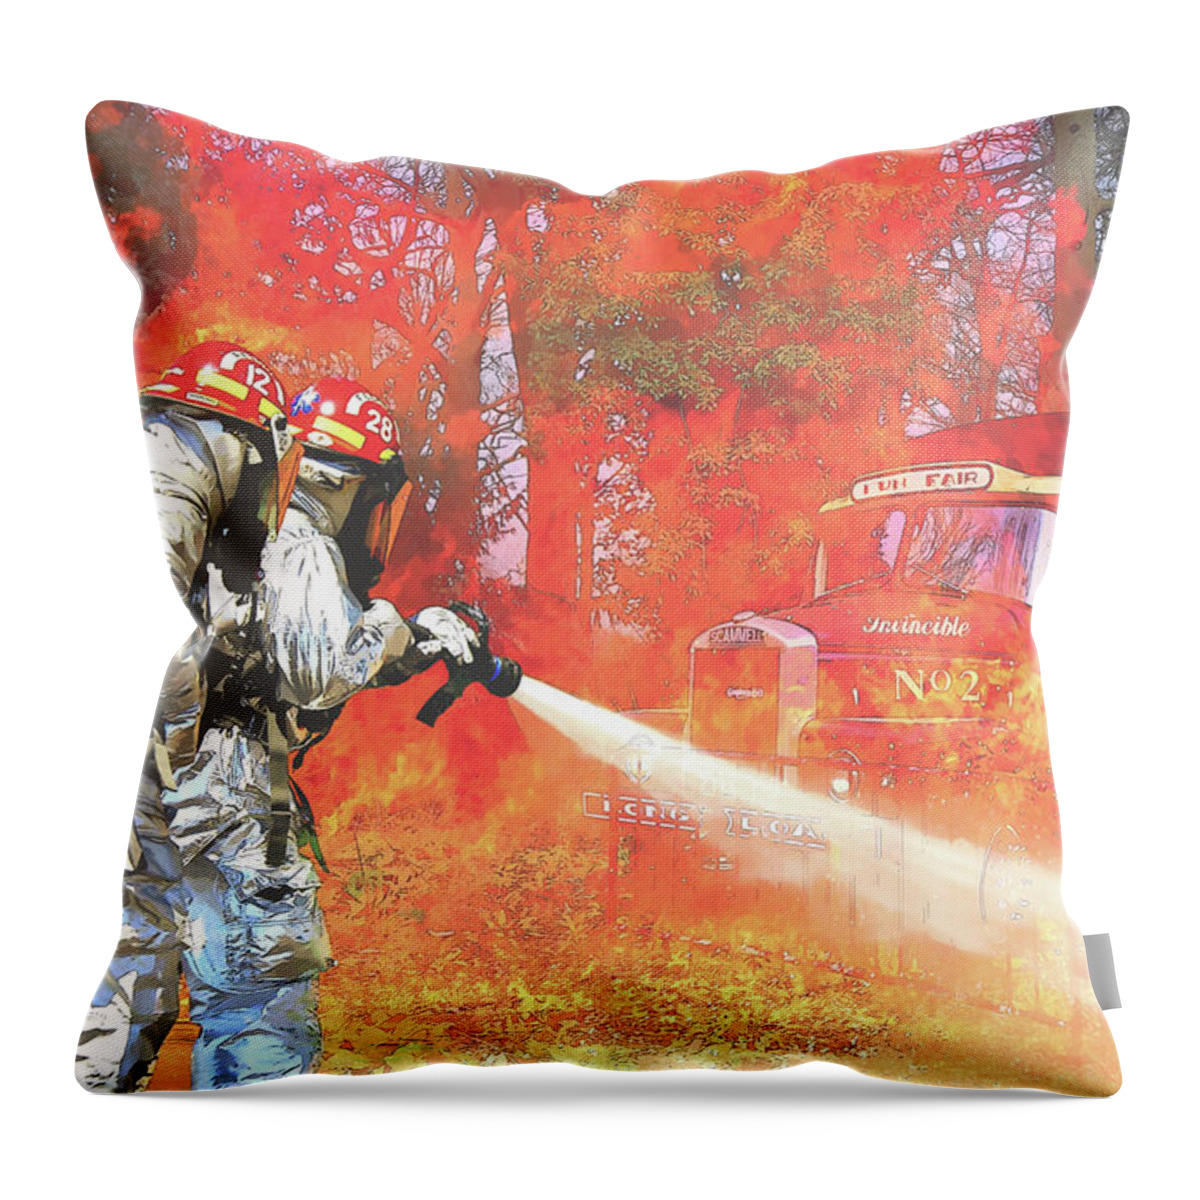 Fire Throw Pillow featuring the mixed media Firefighters Saving Burning Antique Fire Engine by Shelli Fitzpatrick